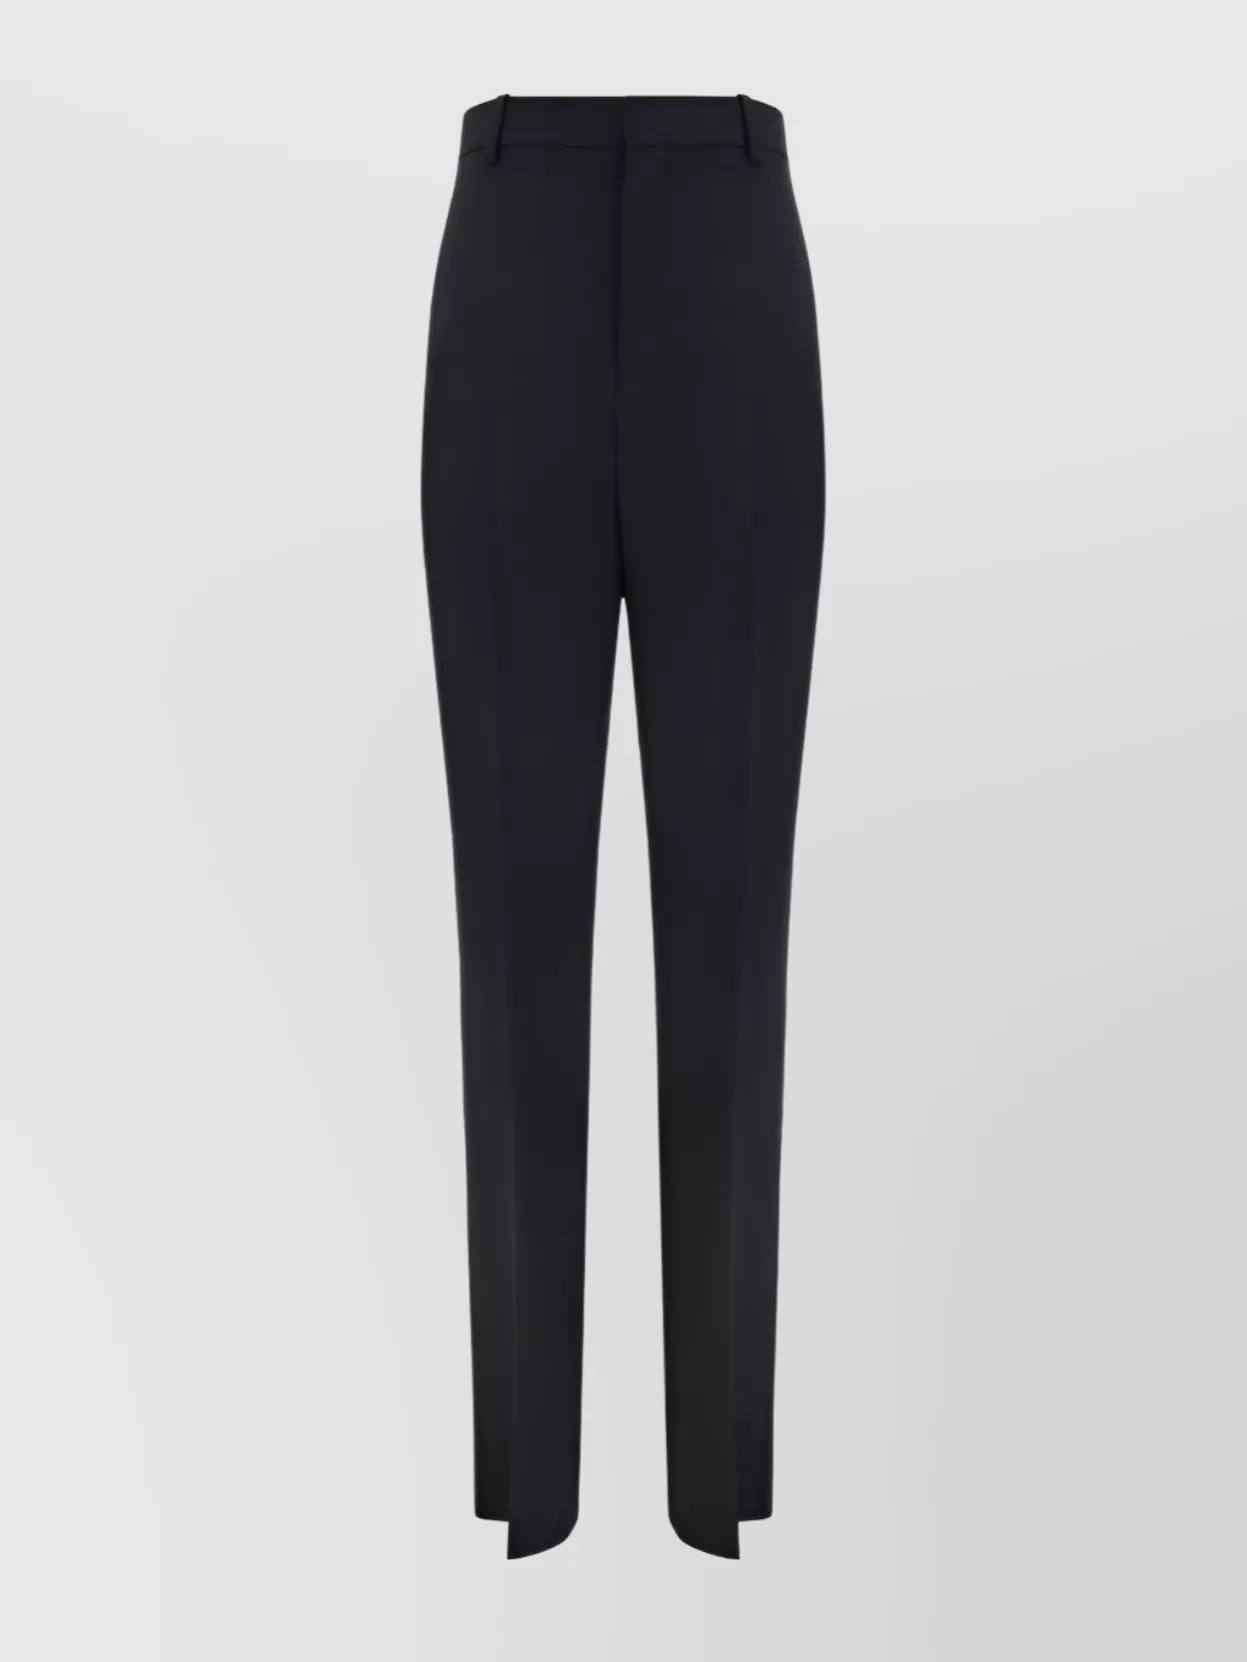 Saint Laurent Wool Trousers Front Crease In Black